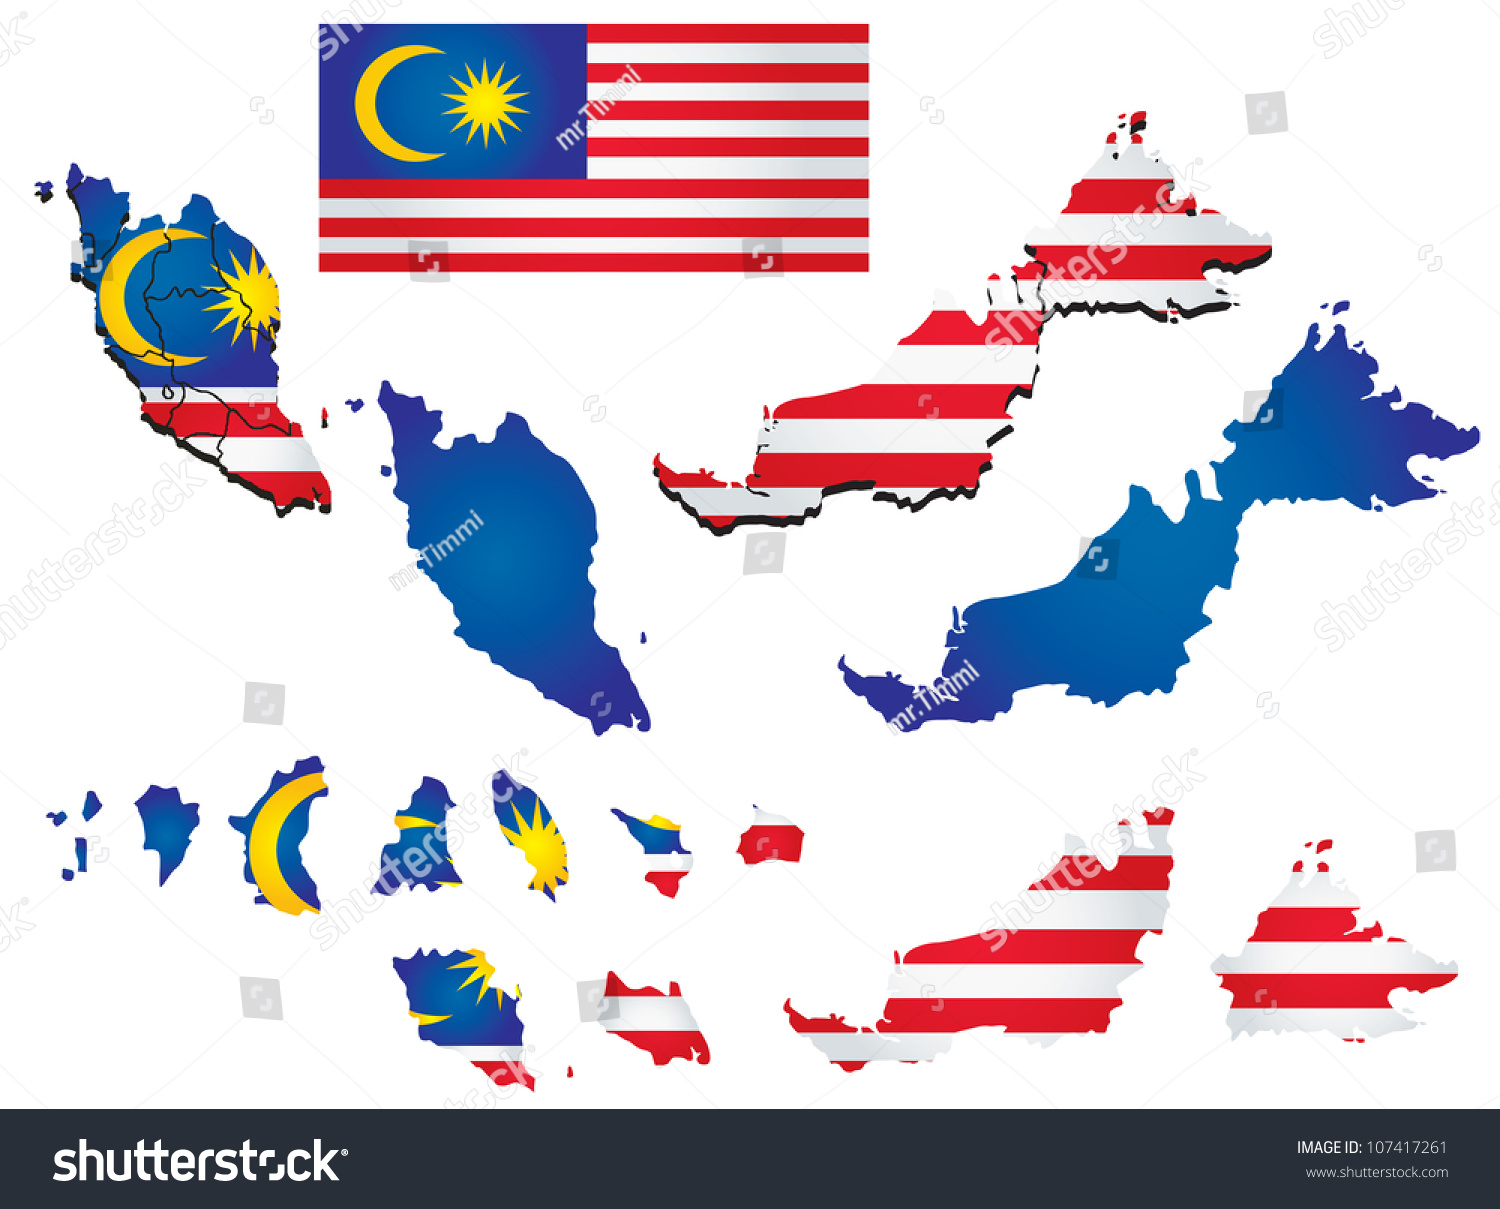 Malaysia Map With Flag Stock Vector Illustration 107417261 Shutterstock